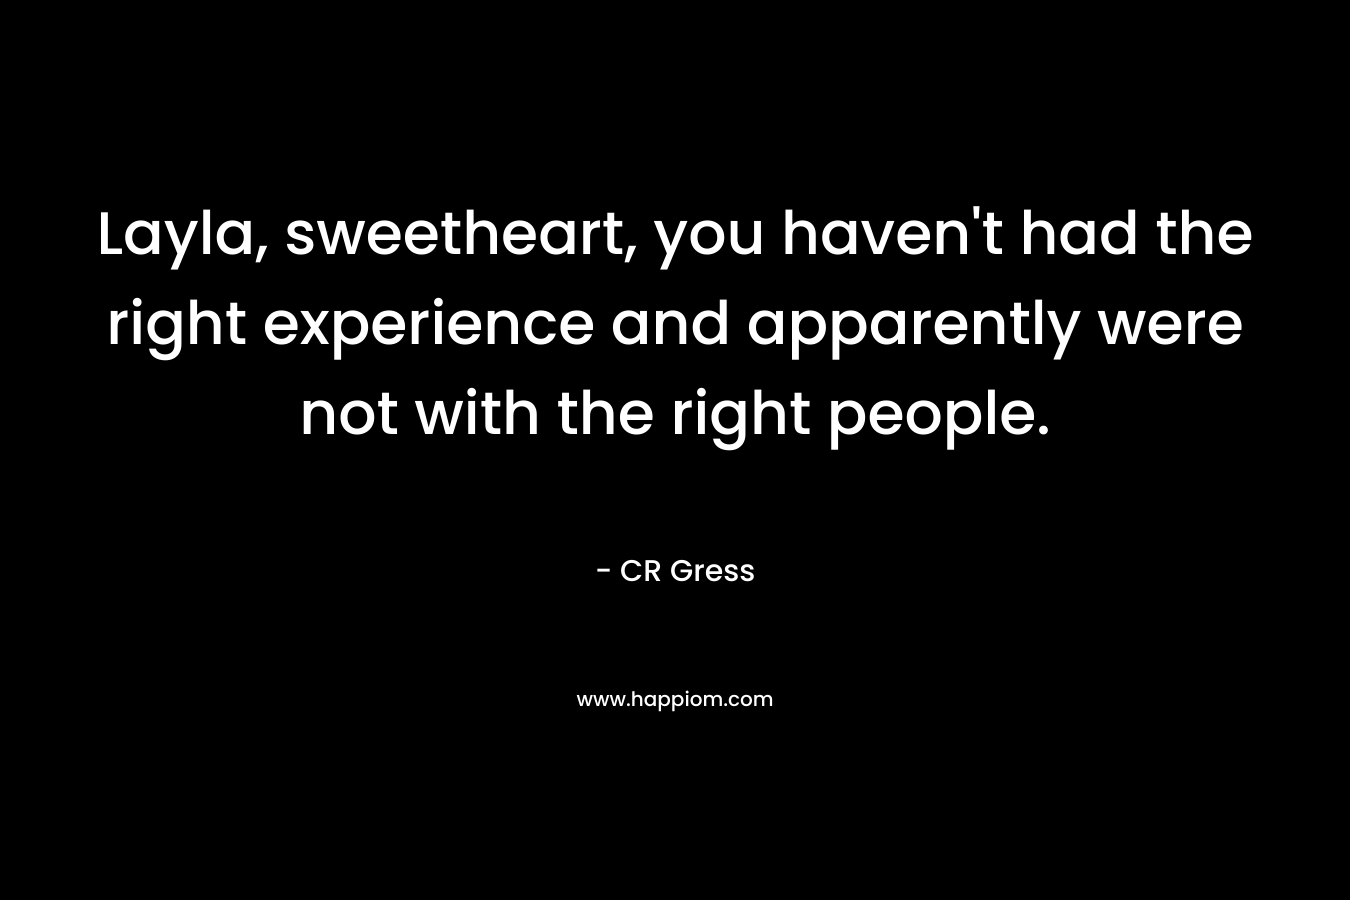 Layla, sweetheart, you haven’t had the right experience and apparently were not with the right people. – CR Gress